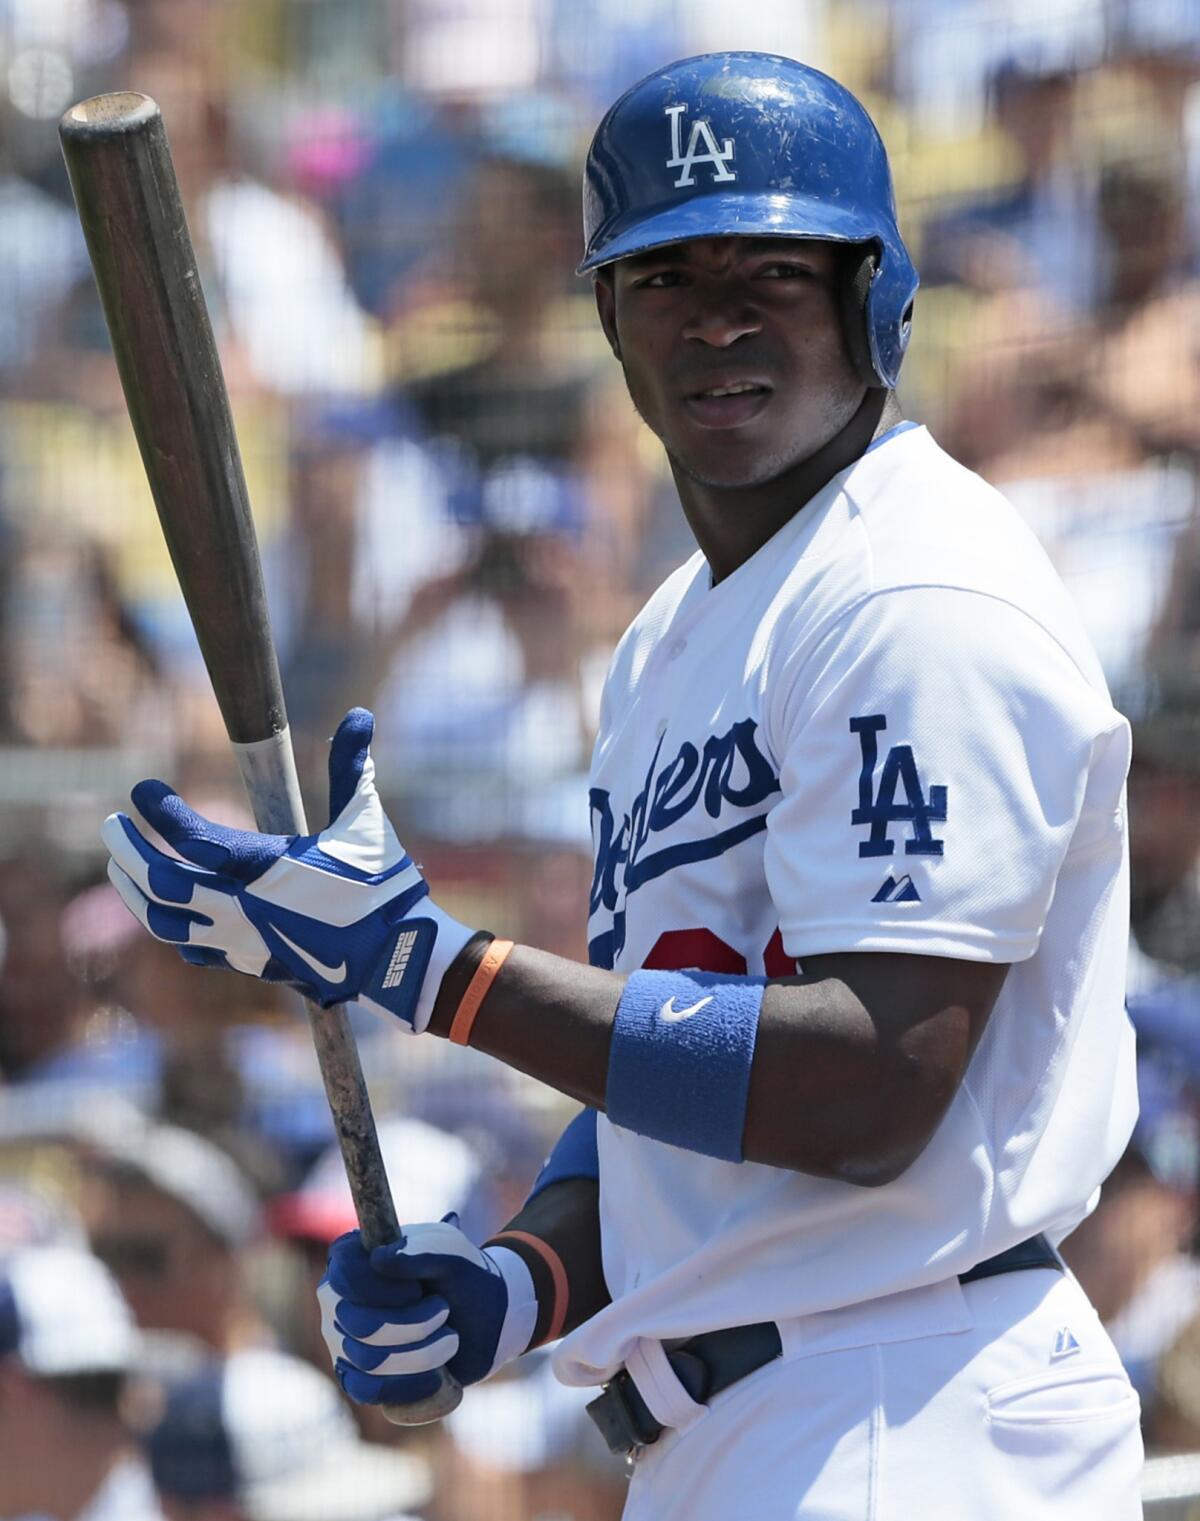 Dodgers rookie Yasiel Puig is being sued by a man who alleges the outfielder made false accusations against him.